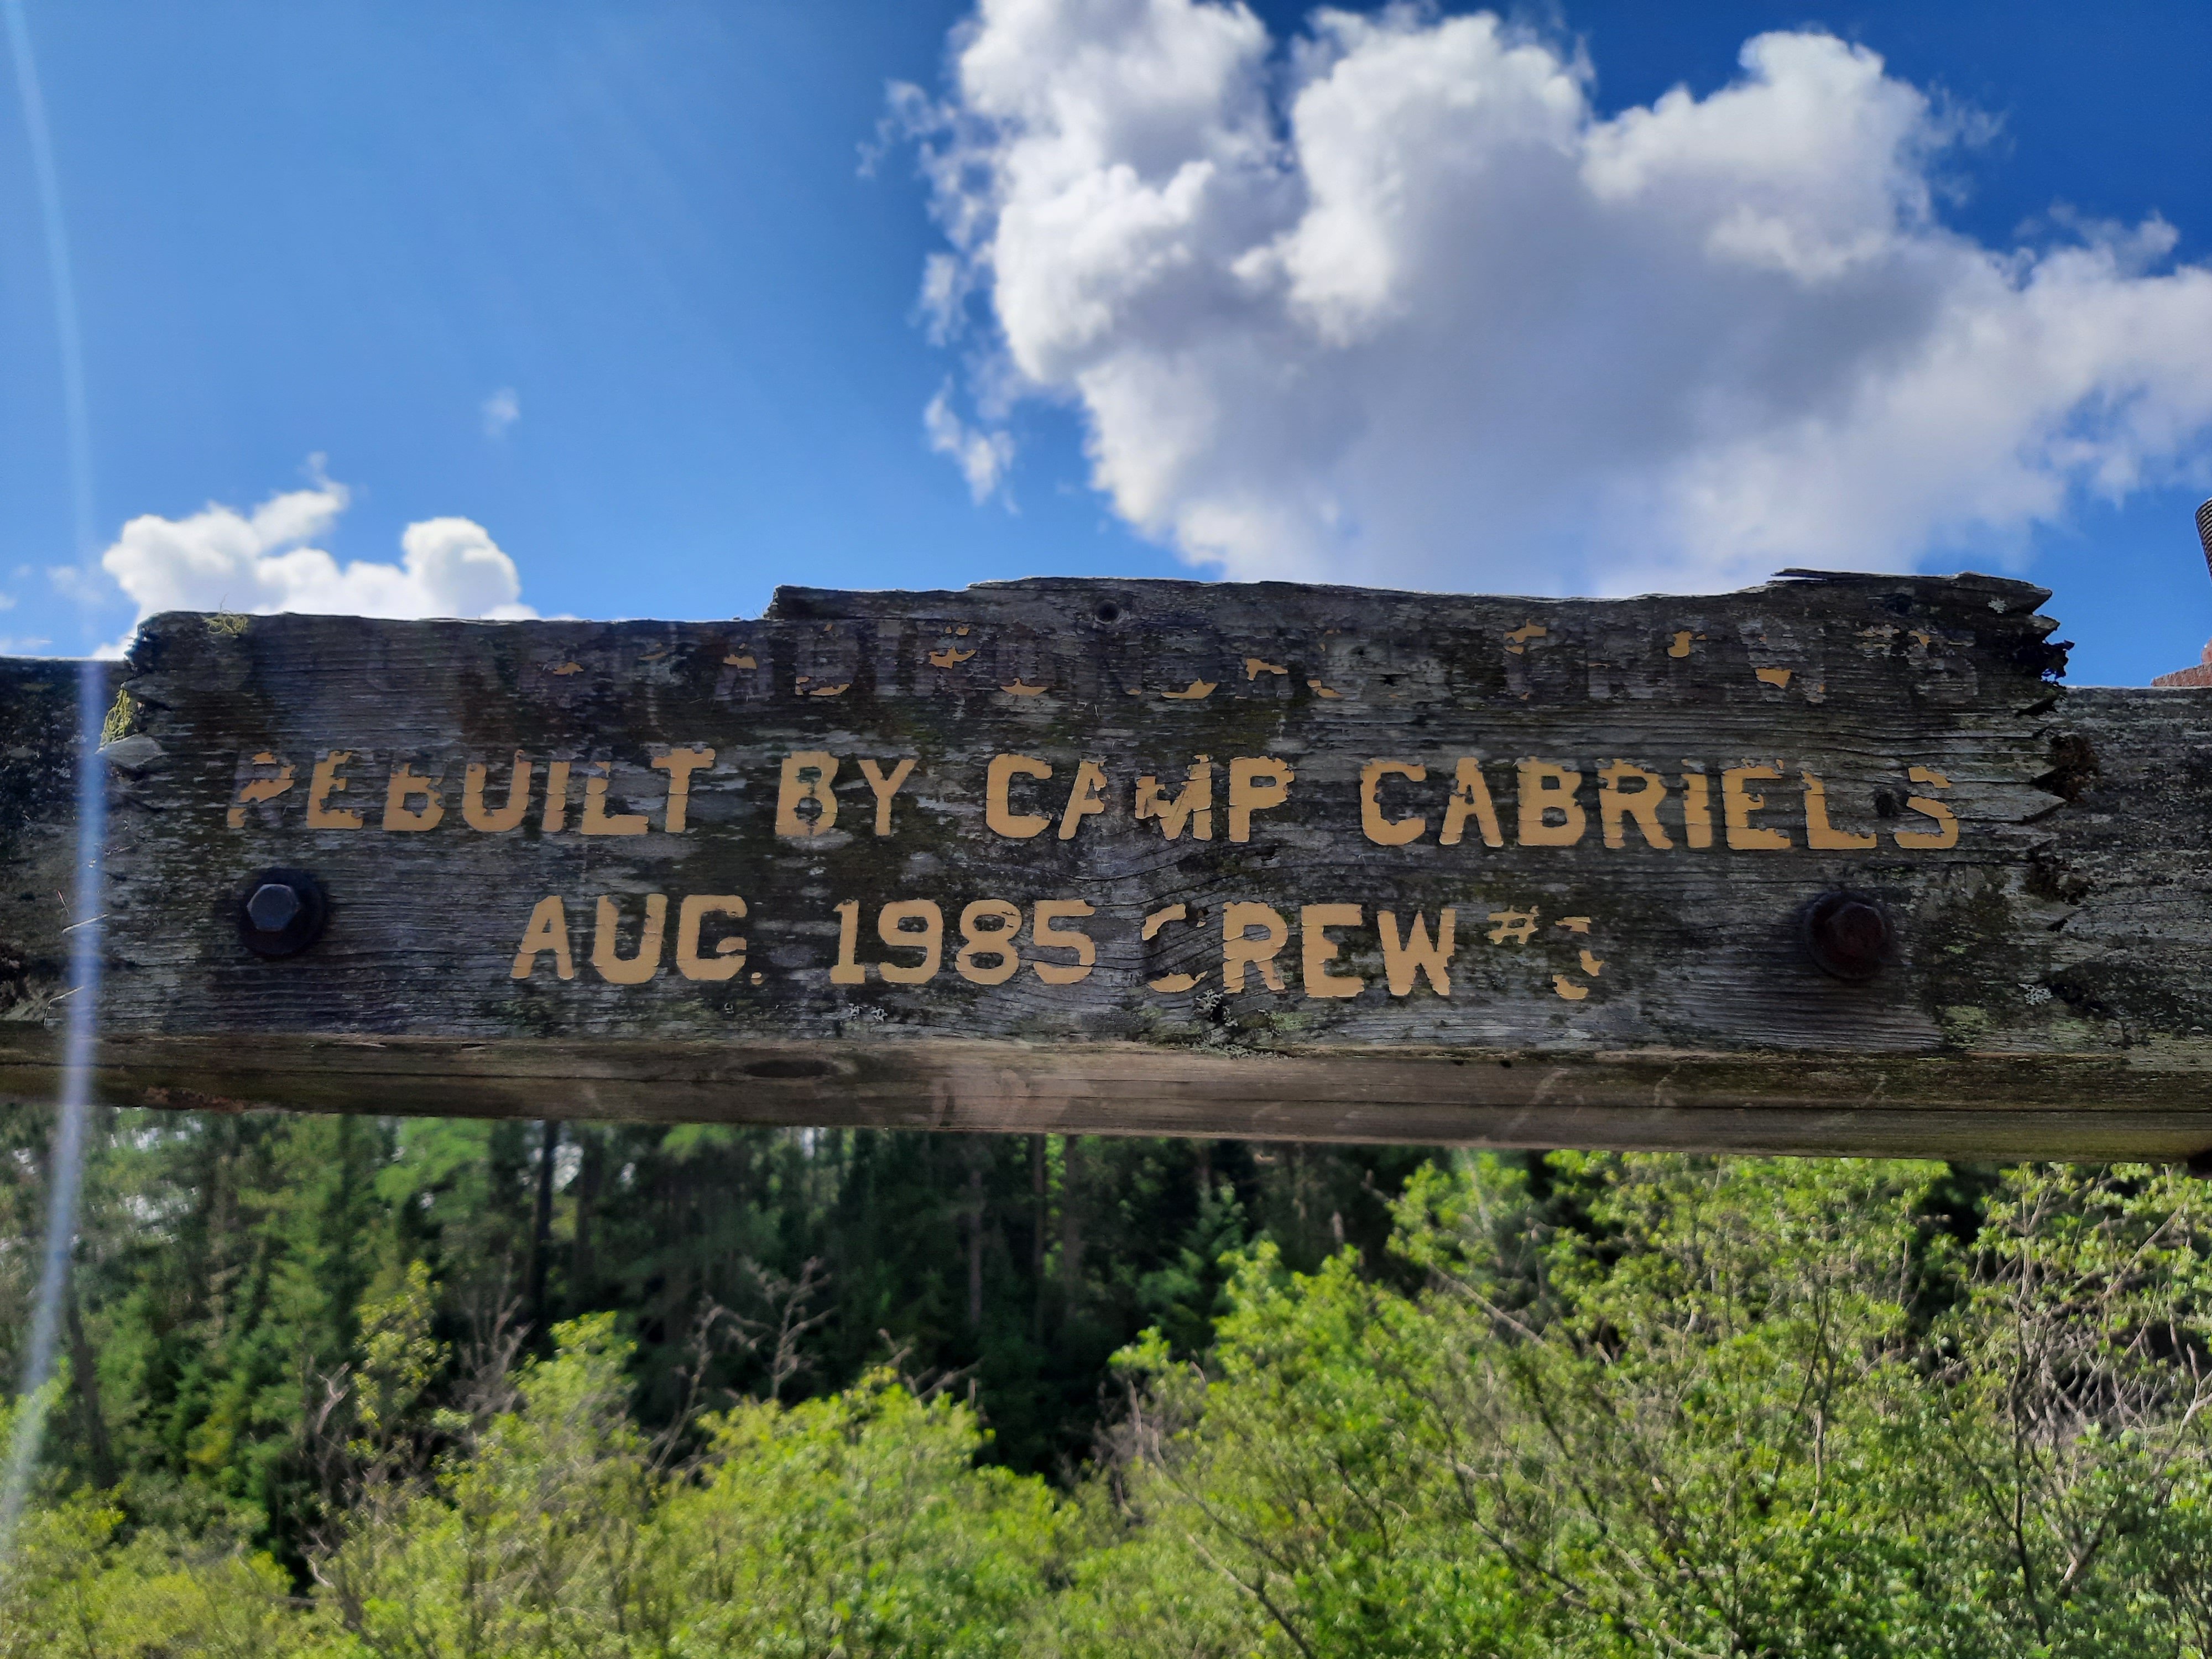 wooden sign from 1985 showing that Camp Gabriels inmates had rebuilt a large wooden bridge on a popular hiking trail in Ray Brook